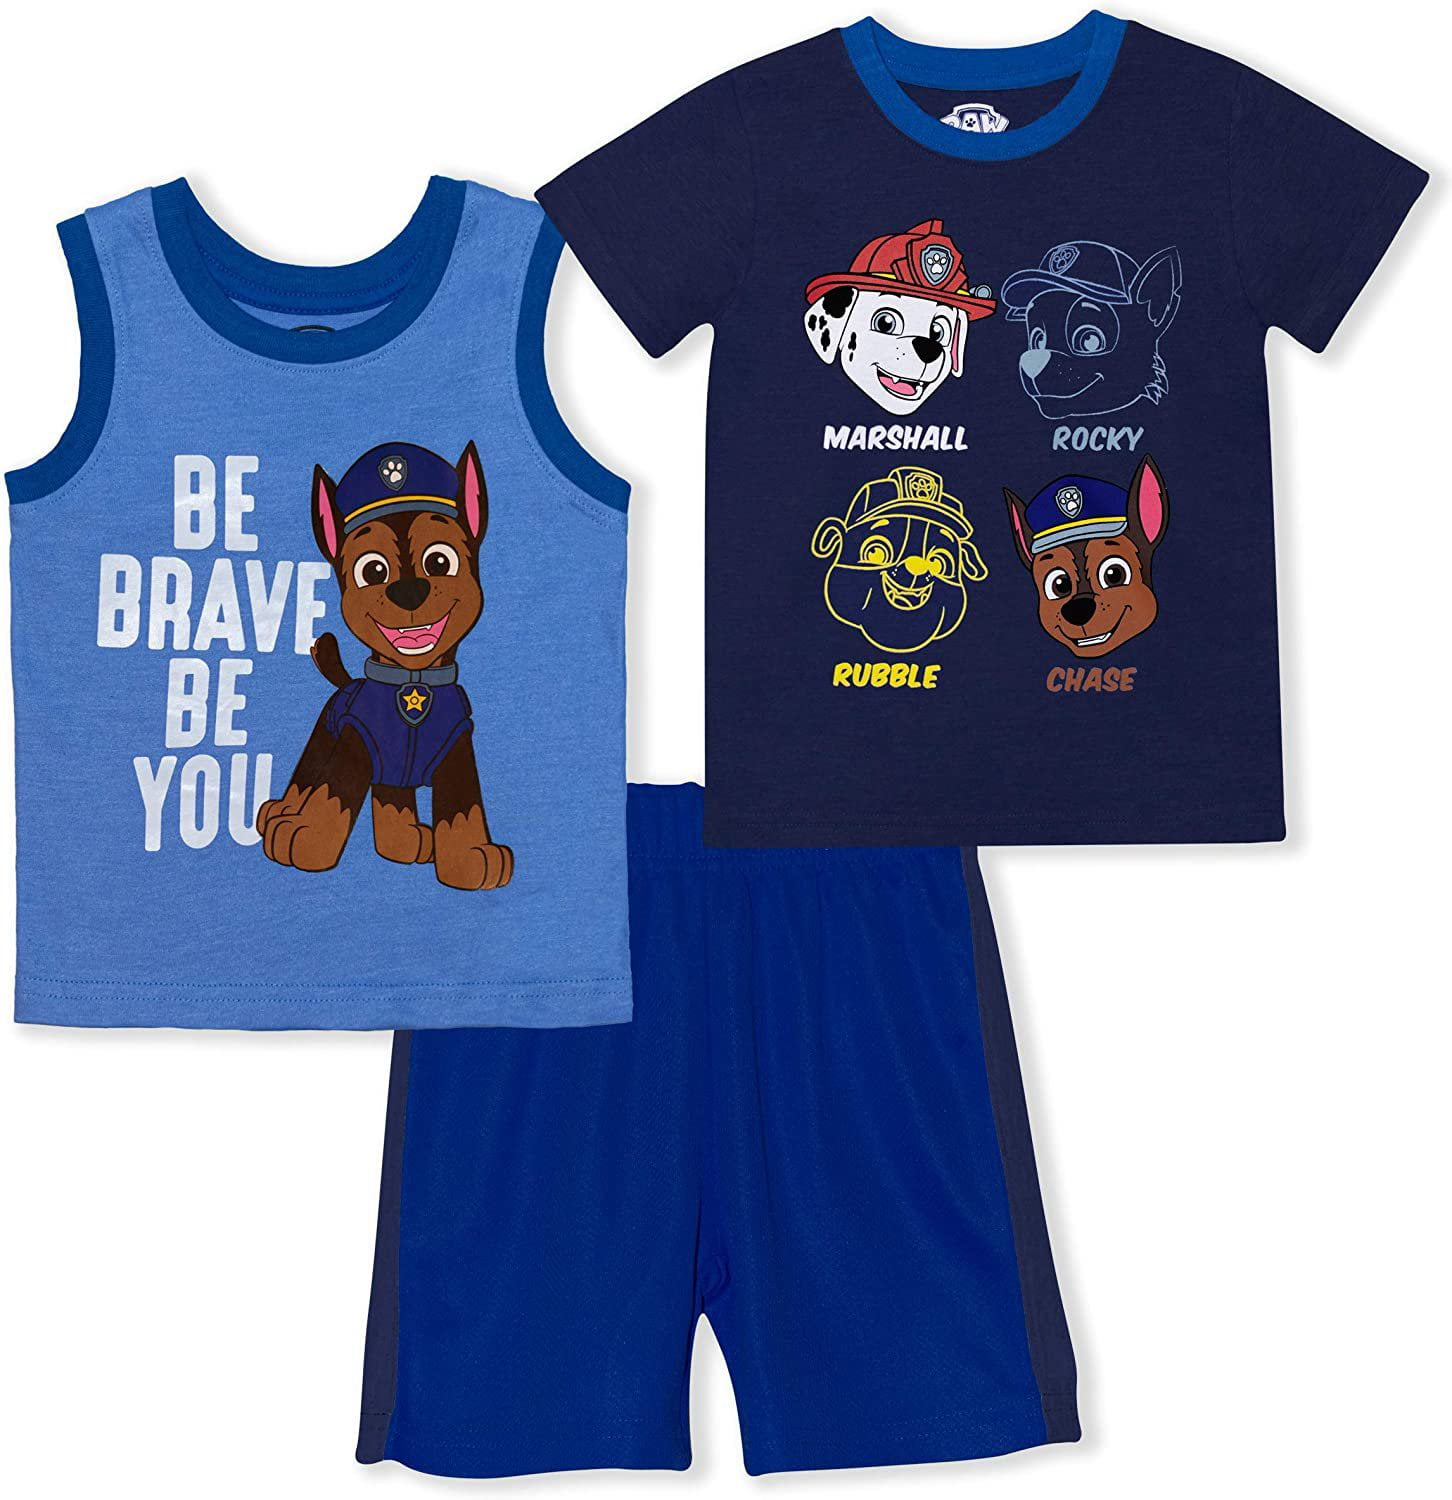 BOYS NICKELODEON PAW PATROL 2 PIECE SHORT SET  SIZE 2T  NEW WITH TAGS 